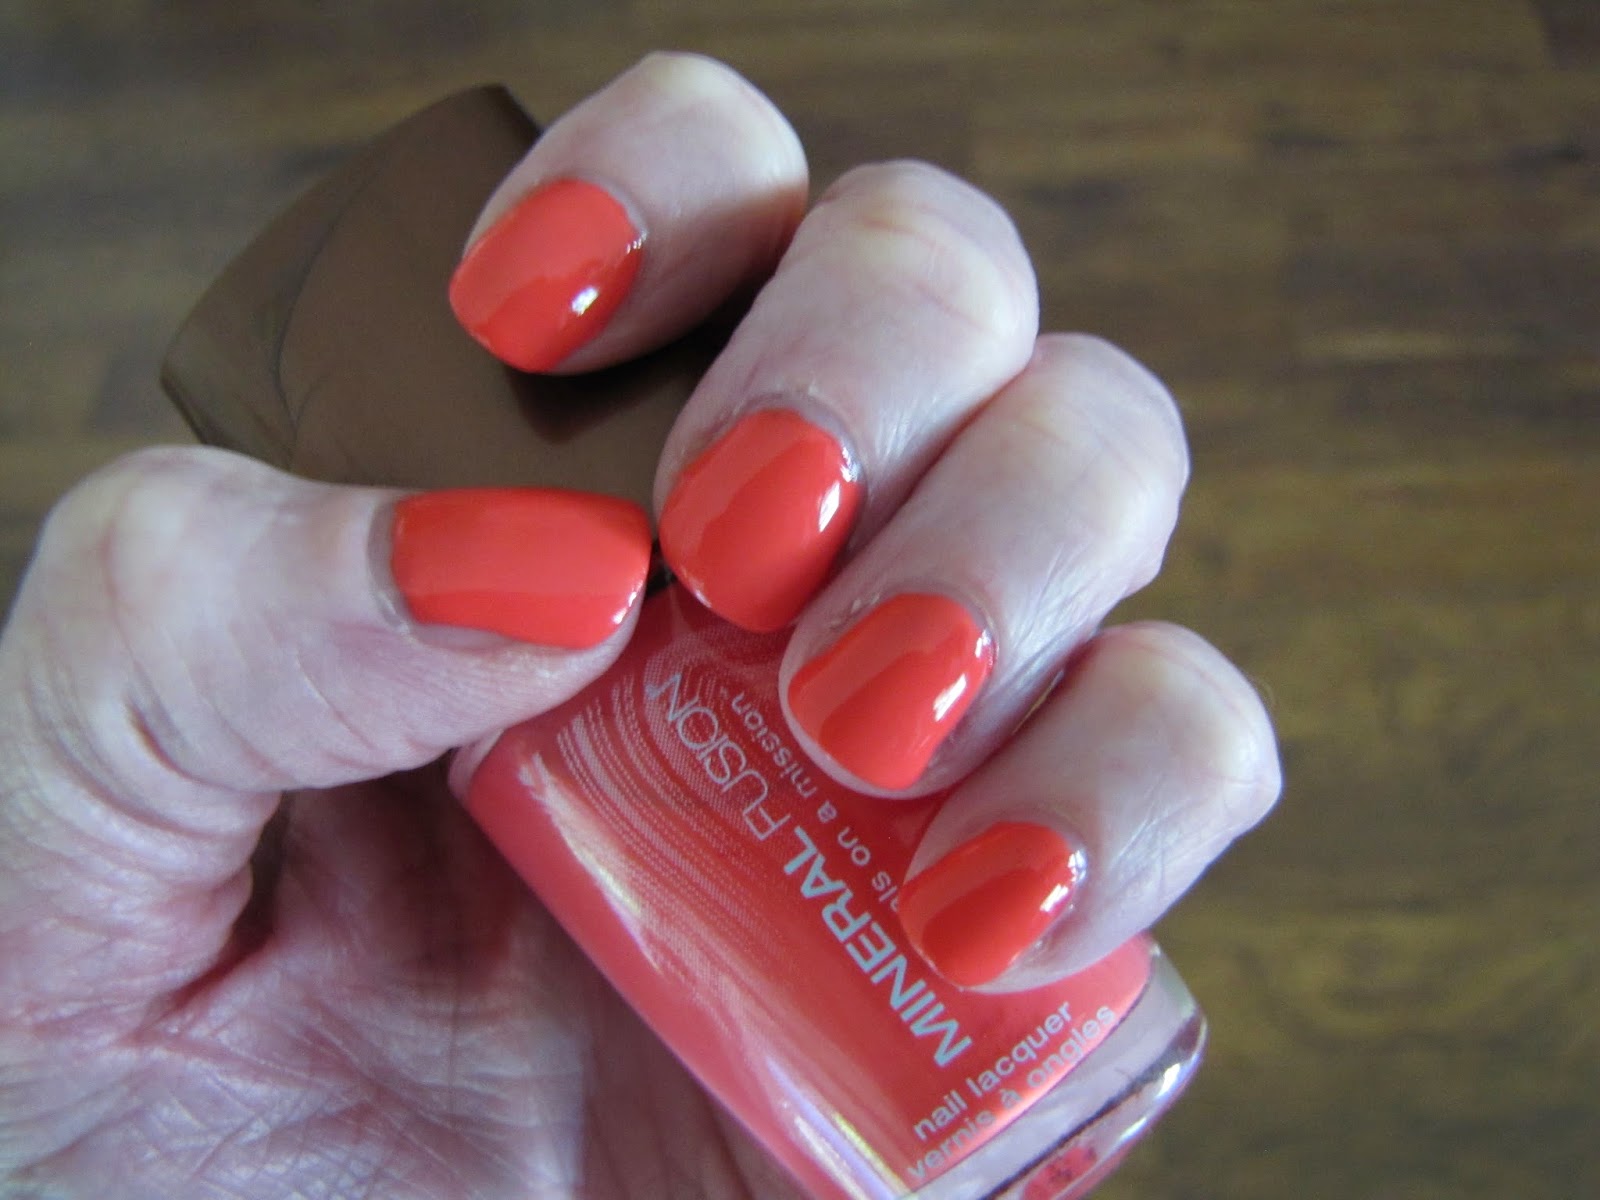 10. Sinful Colors Professional Nail Polish in "Island Coral" - wide 6